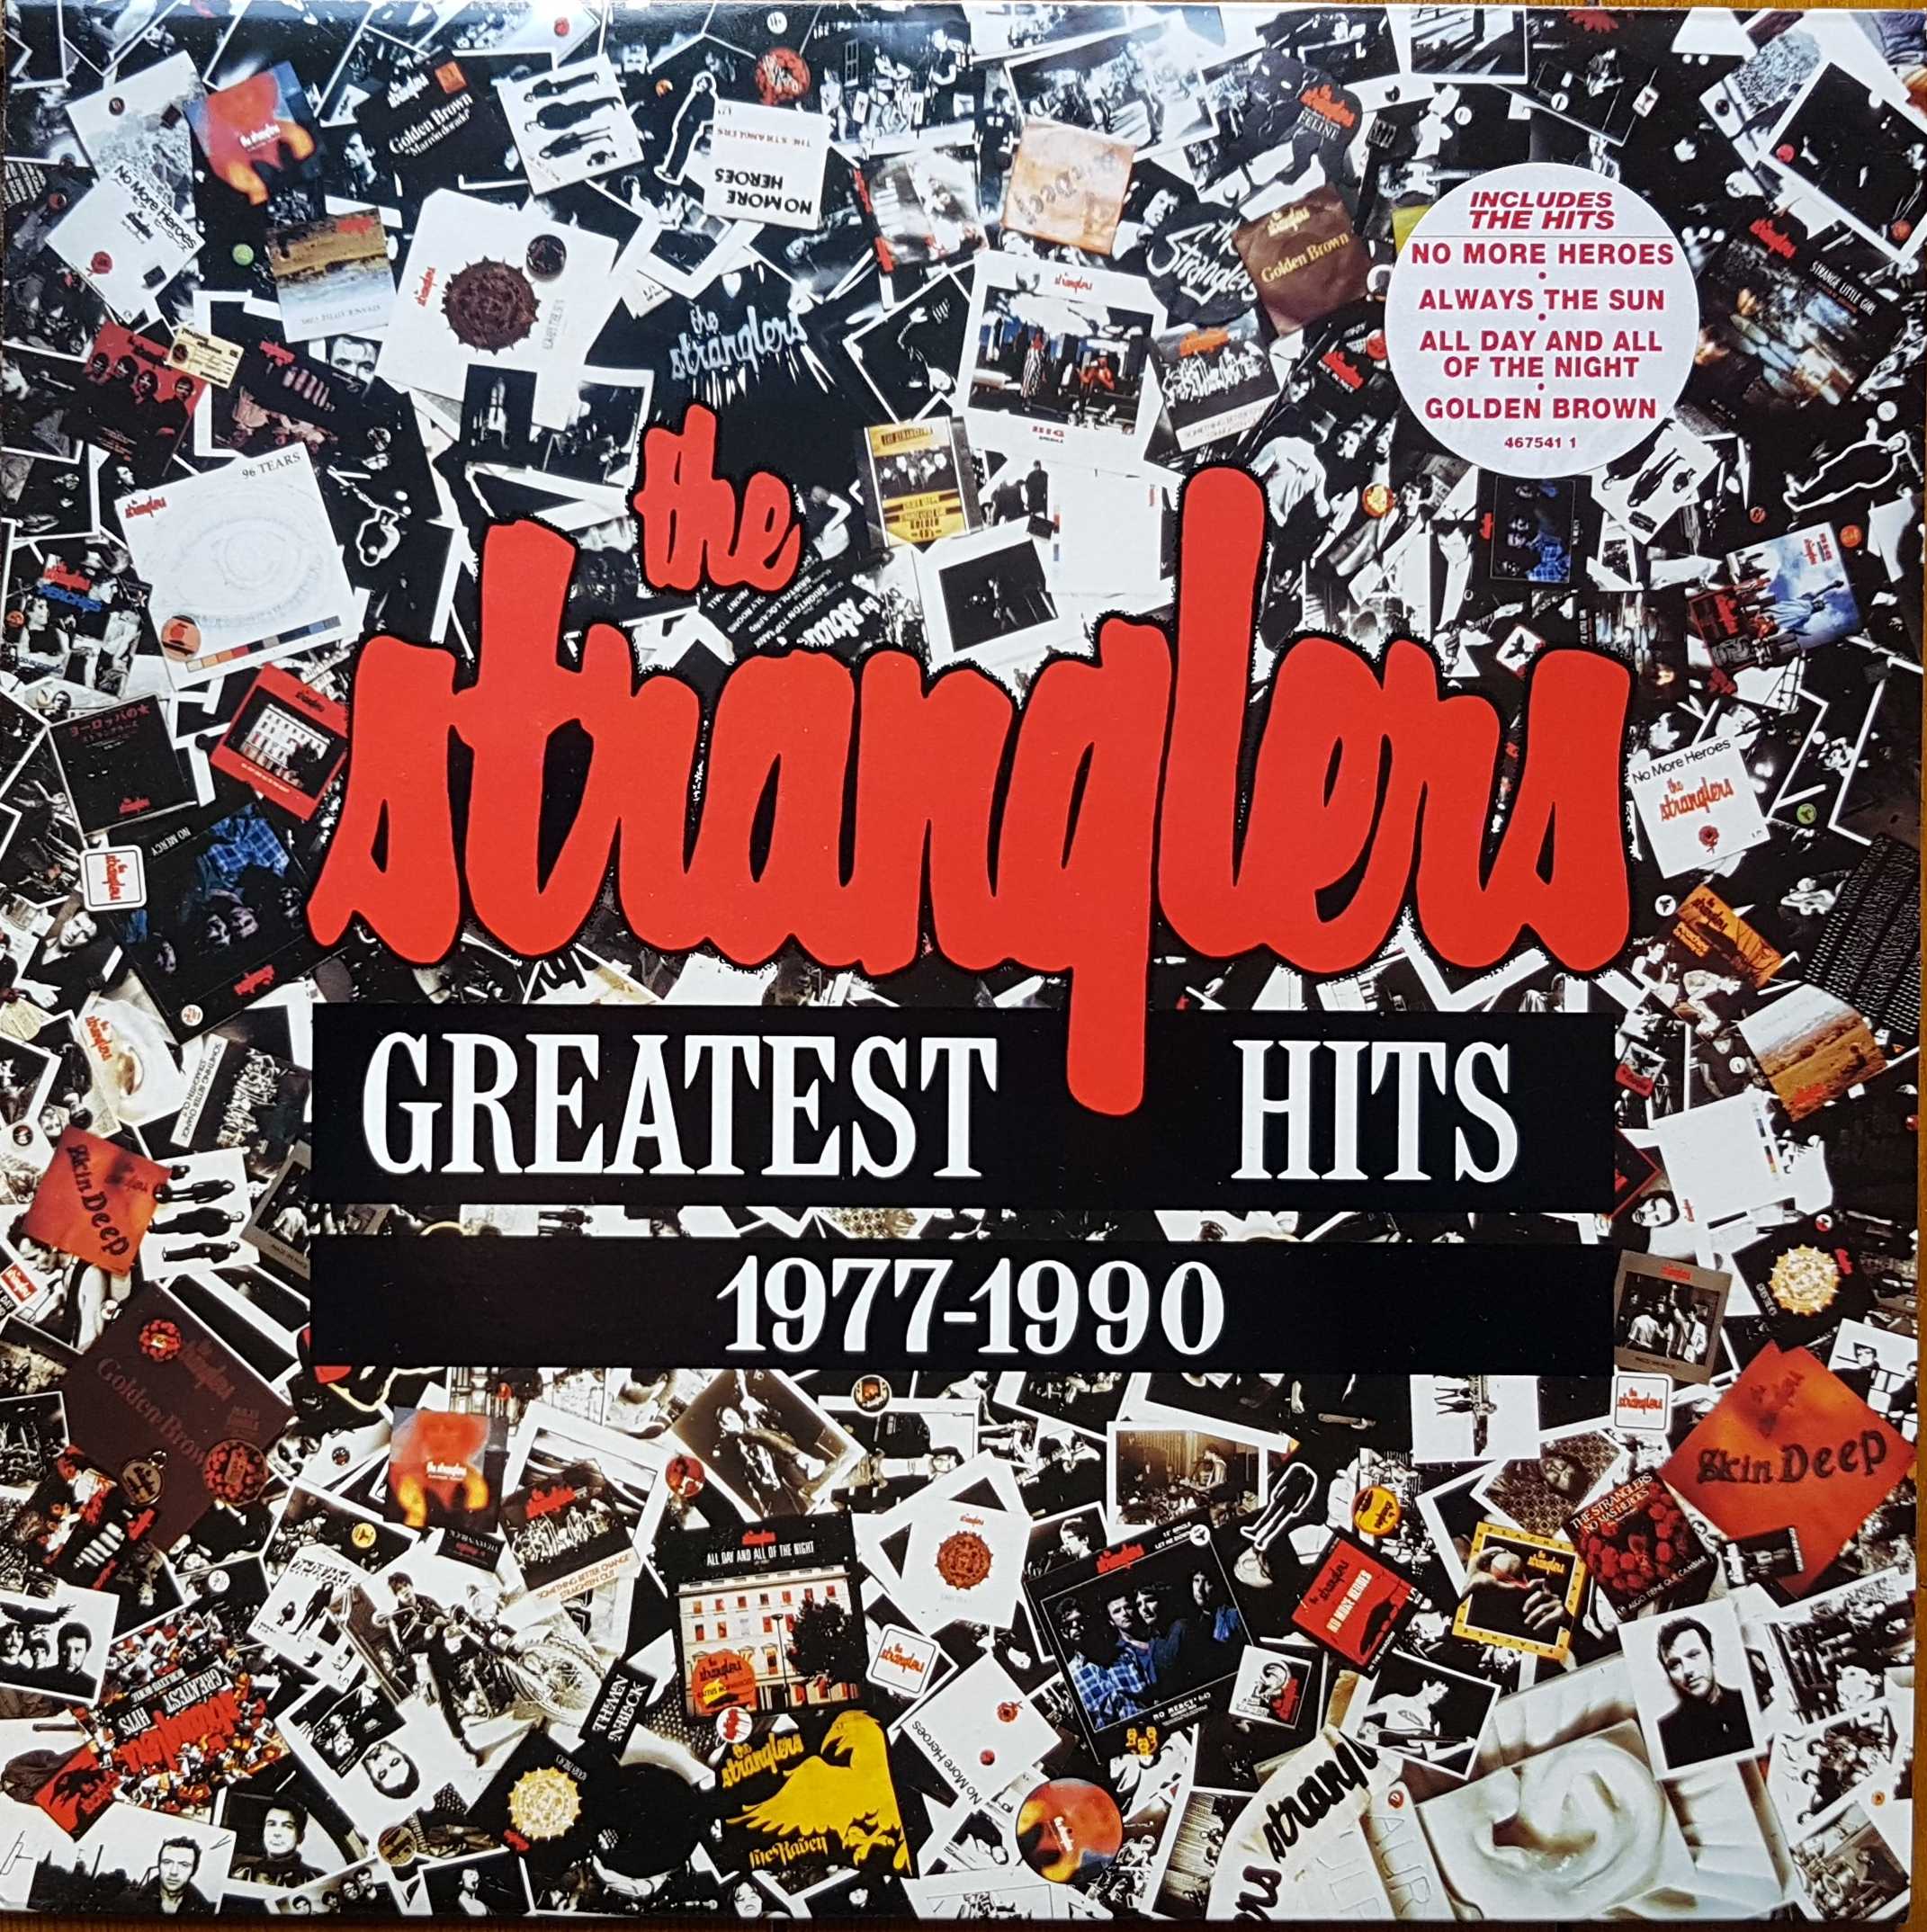 Picture of 467541 1 Greatest hits 1977 - 1990 by artist The Stranglers 